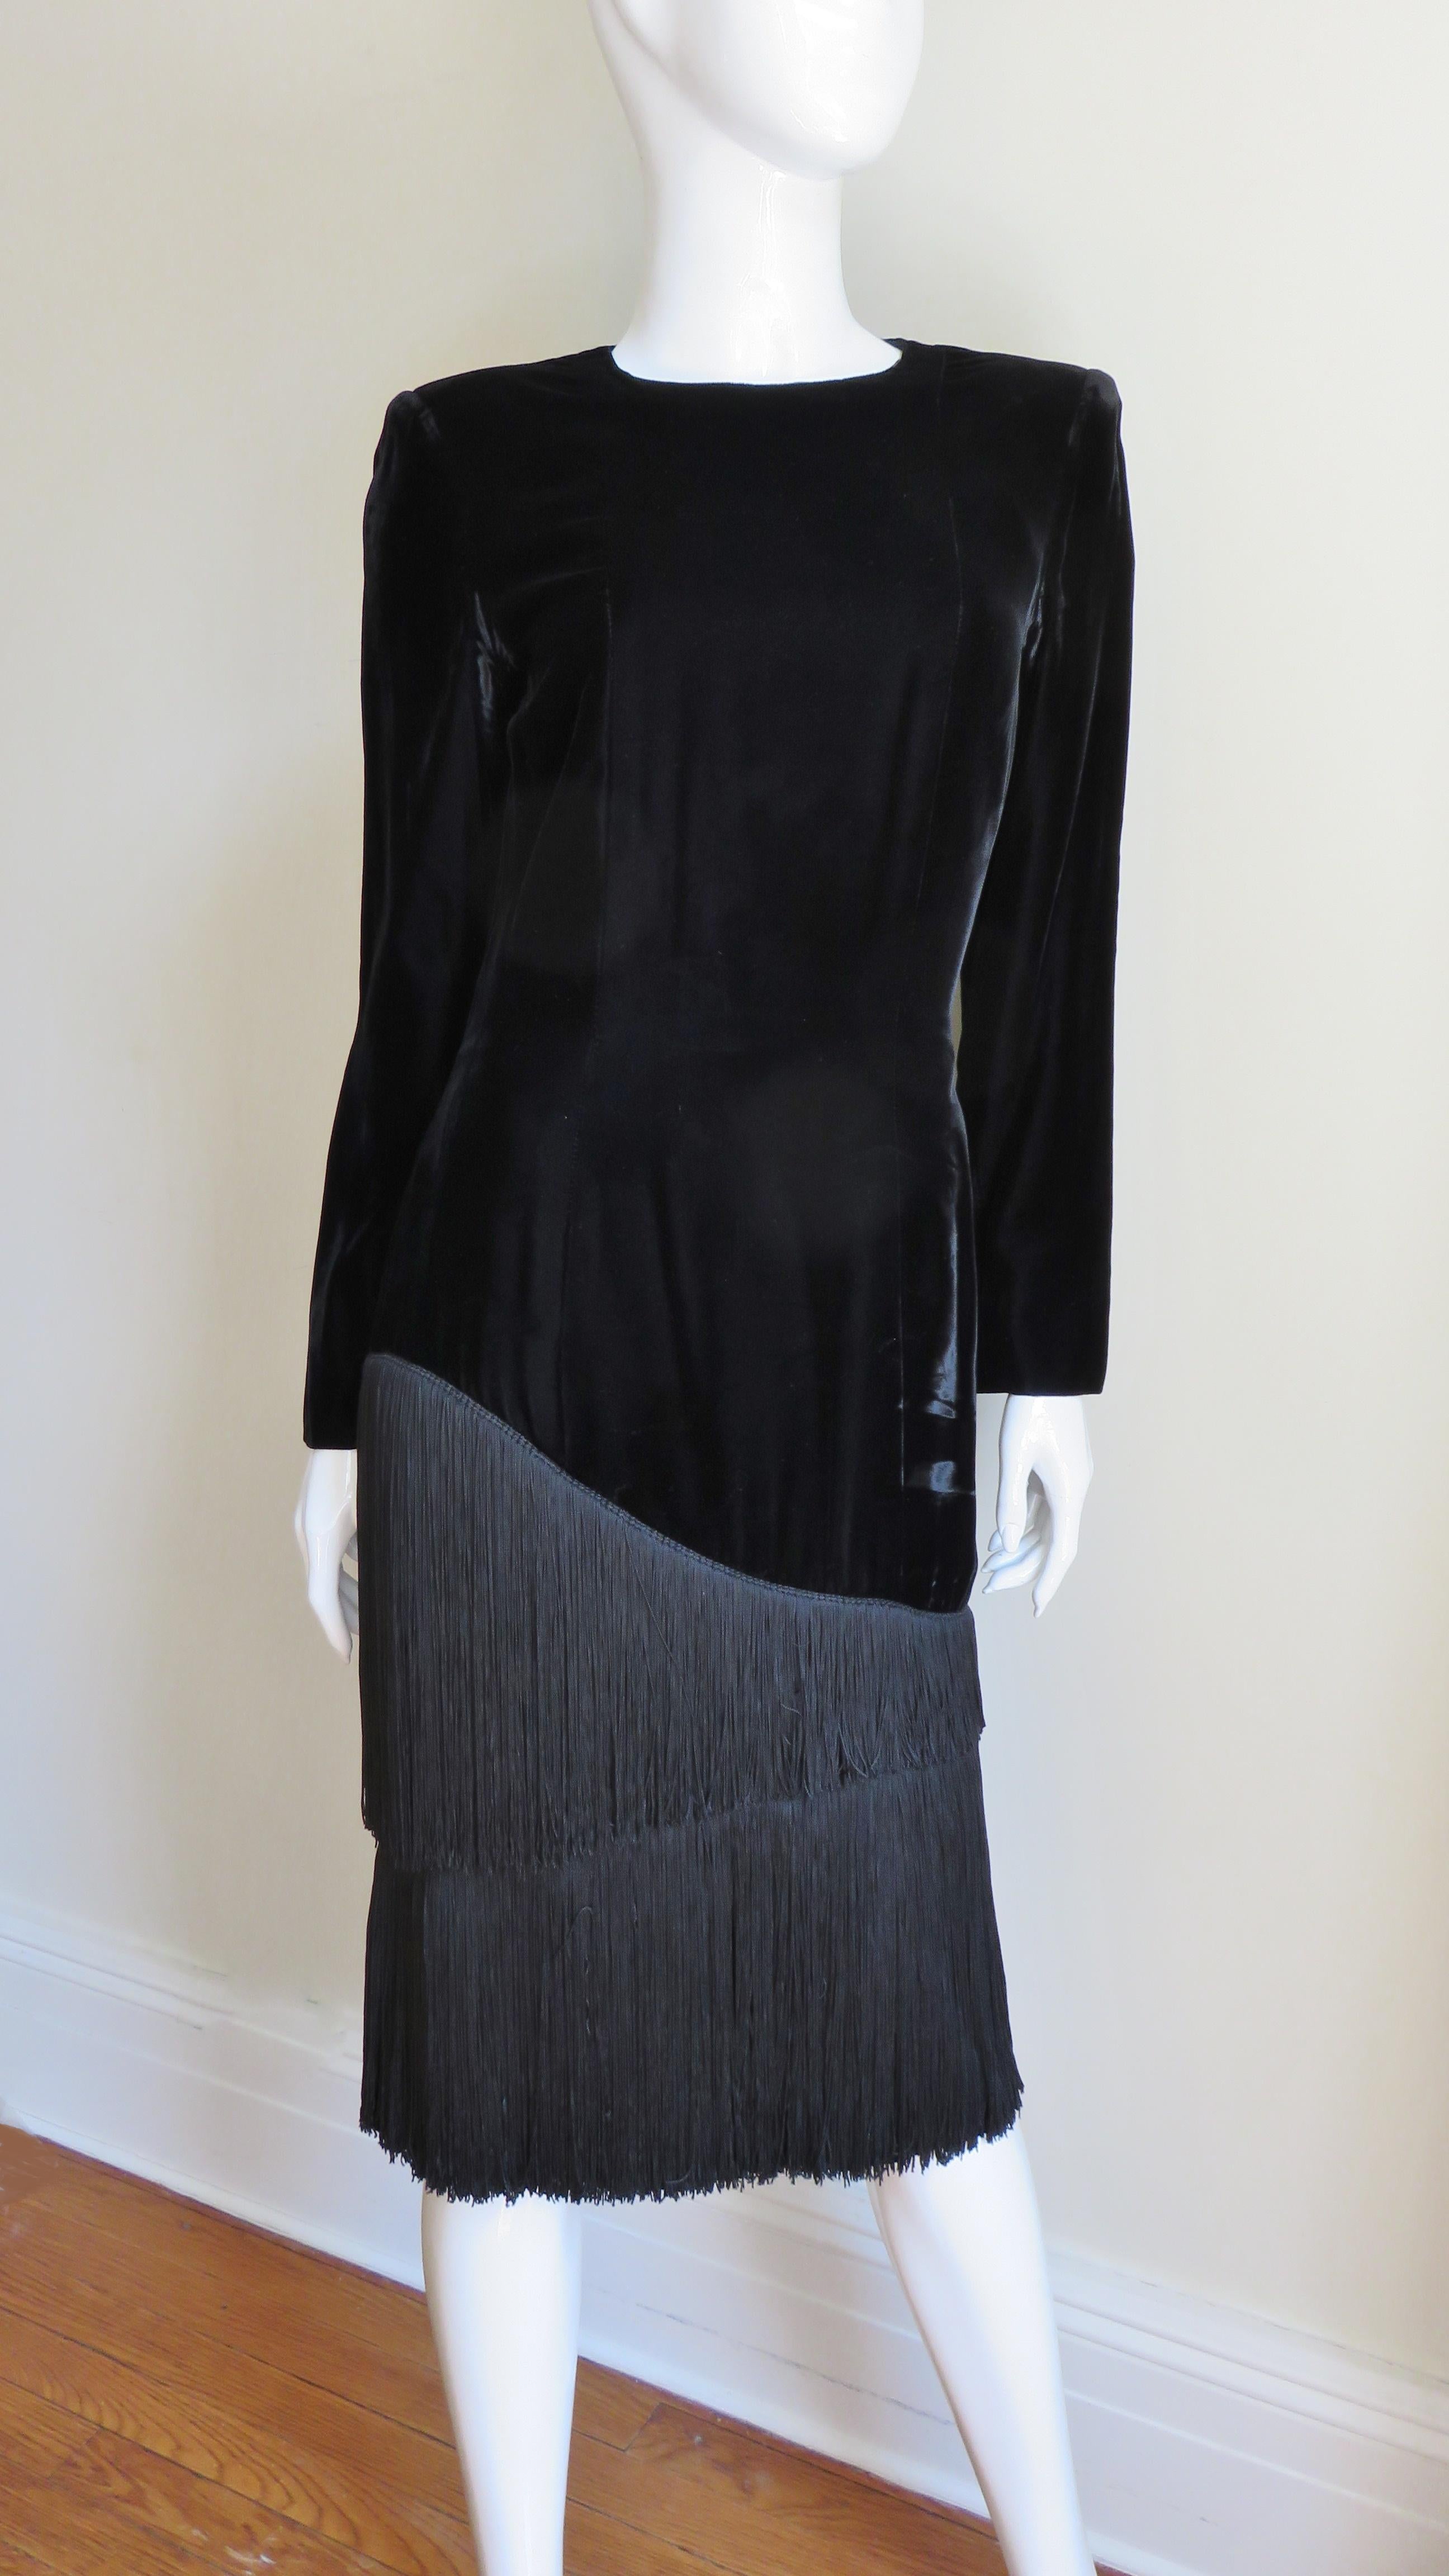 A fabulous black velvet dress from Lanvin. It is a simple long sleeve sheath with a crew neckline semi fitted through the waist then falling straight to hem. A row of gradated 11-13